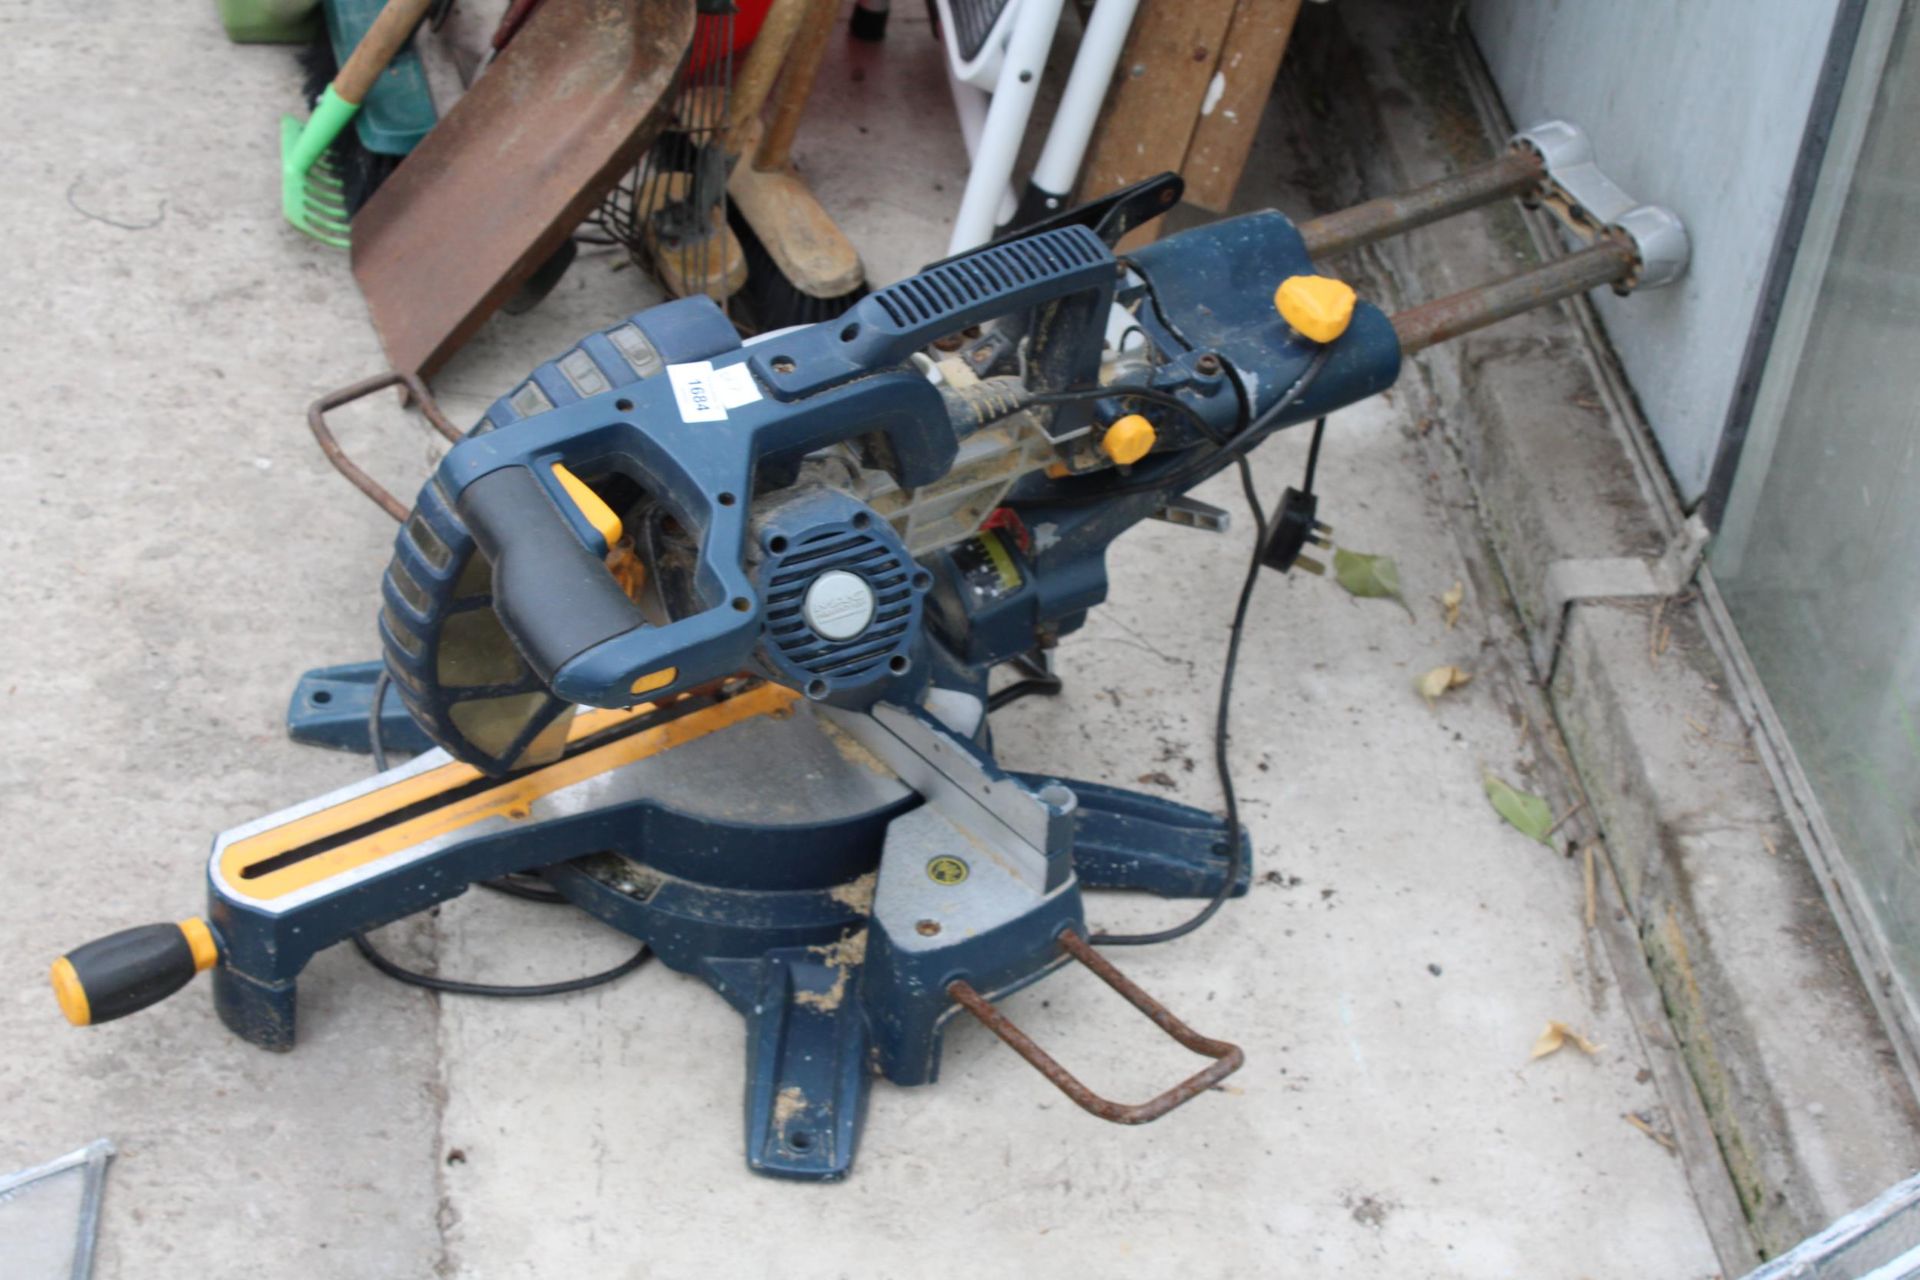 A MACALLISTER ELECTRIC COMPOUND MITRE SAW - Image 2 of 2